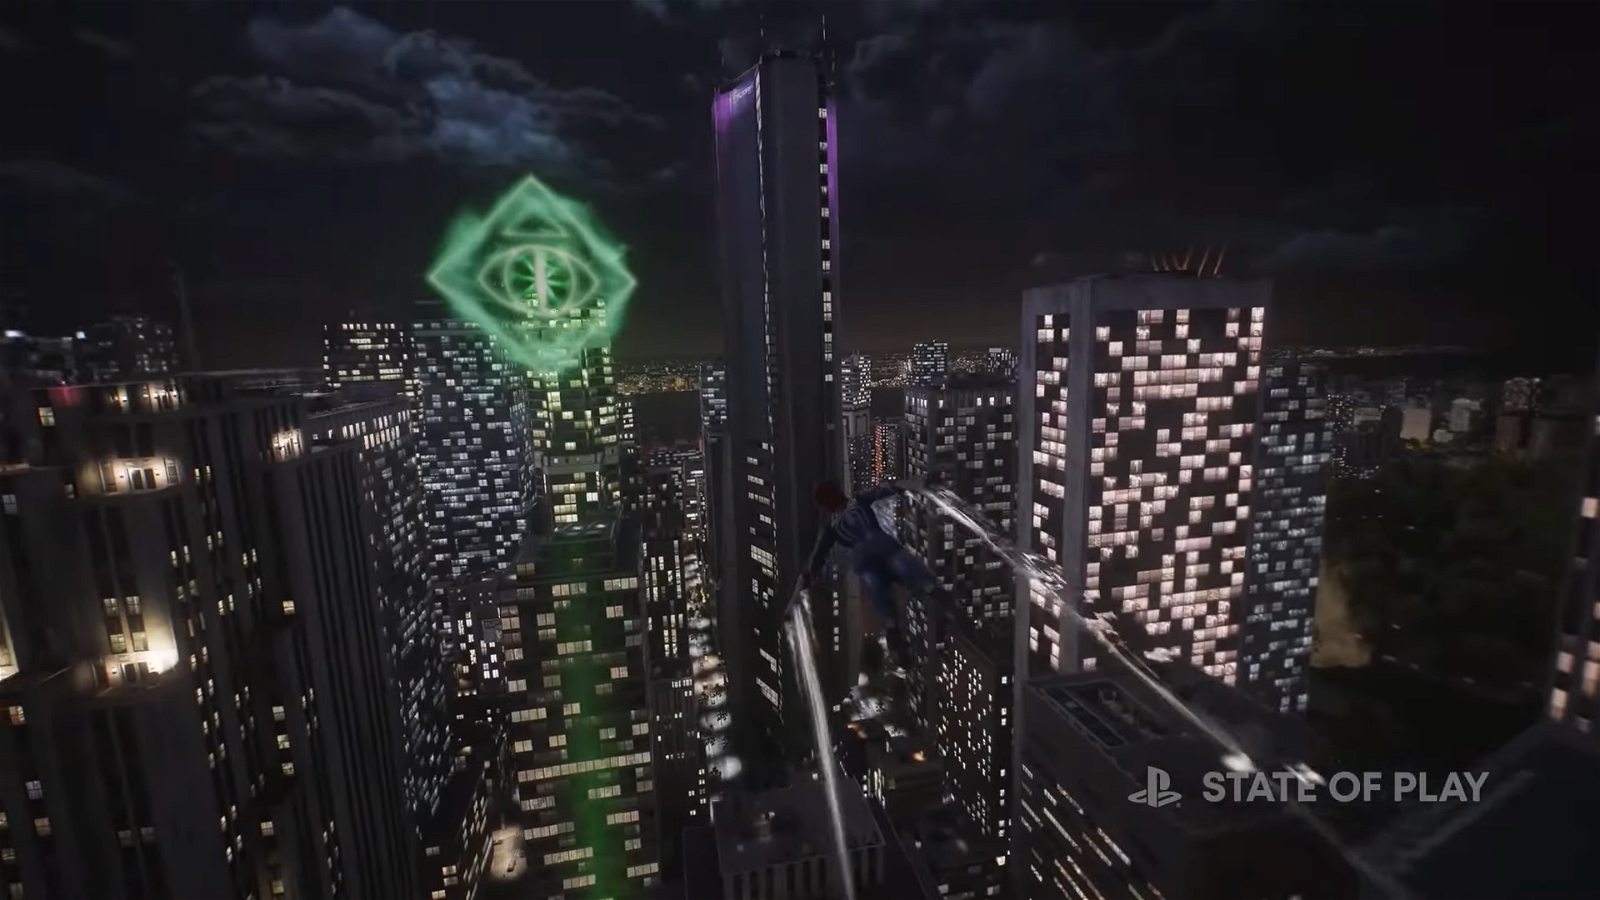 Marvel's Spider-Man 2 showcase has fans hyped up about Mysterio